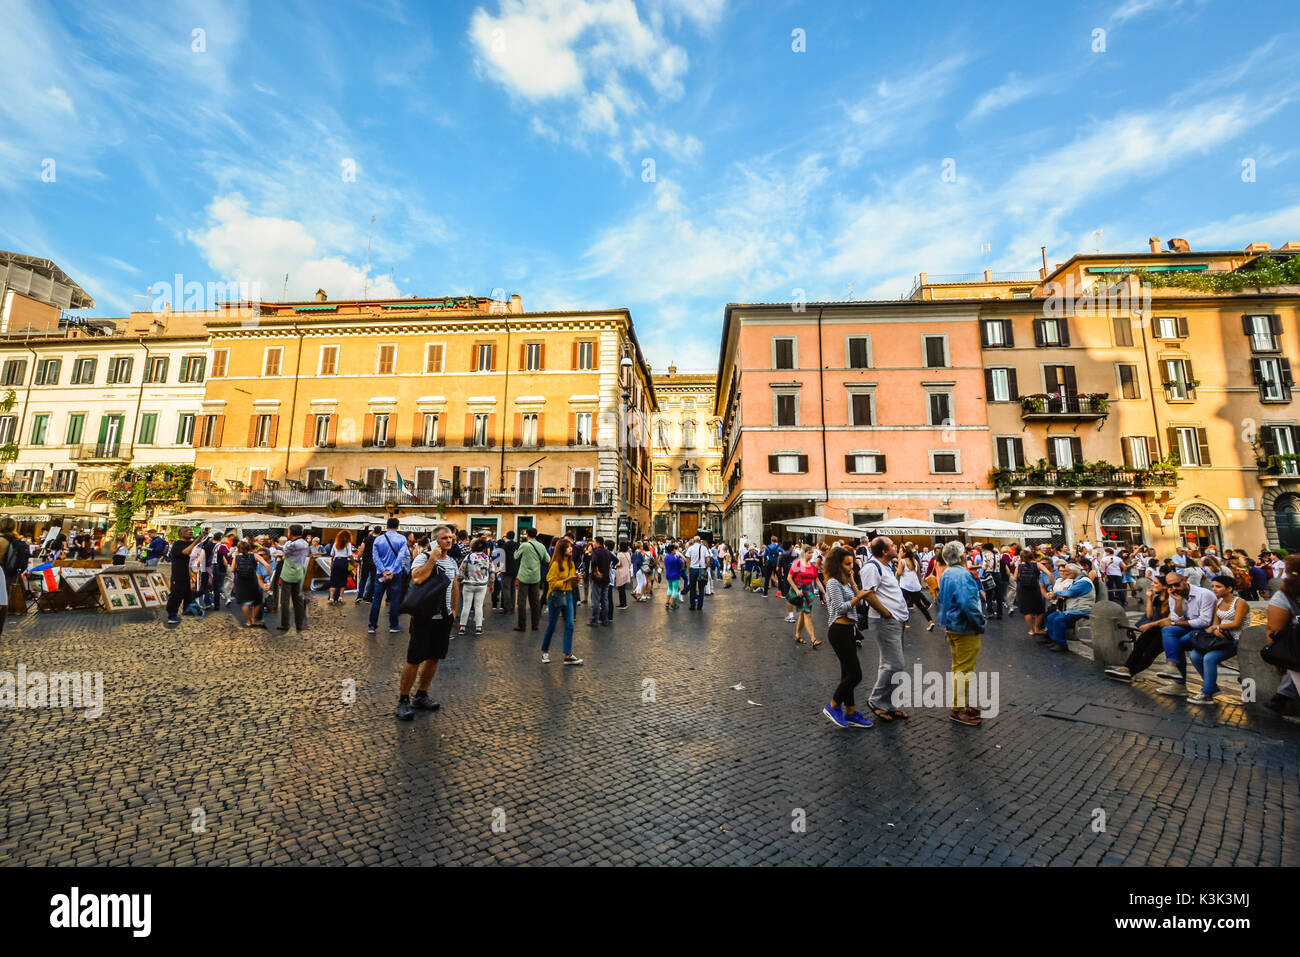 Later afternoon on the Piazza Navona as the sunlight shines off a window and locals and tourists enjoy themselves Stock Photo